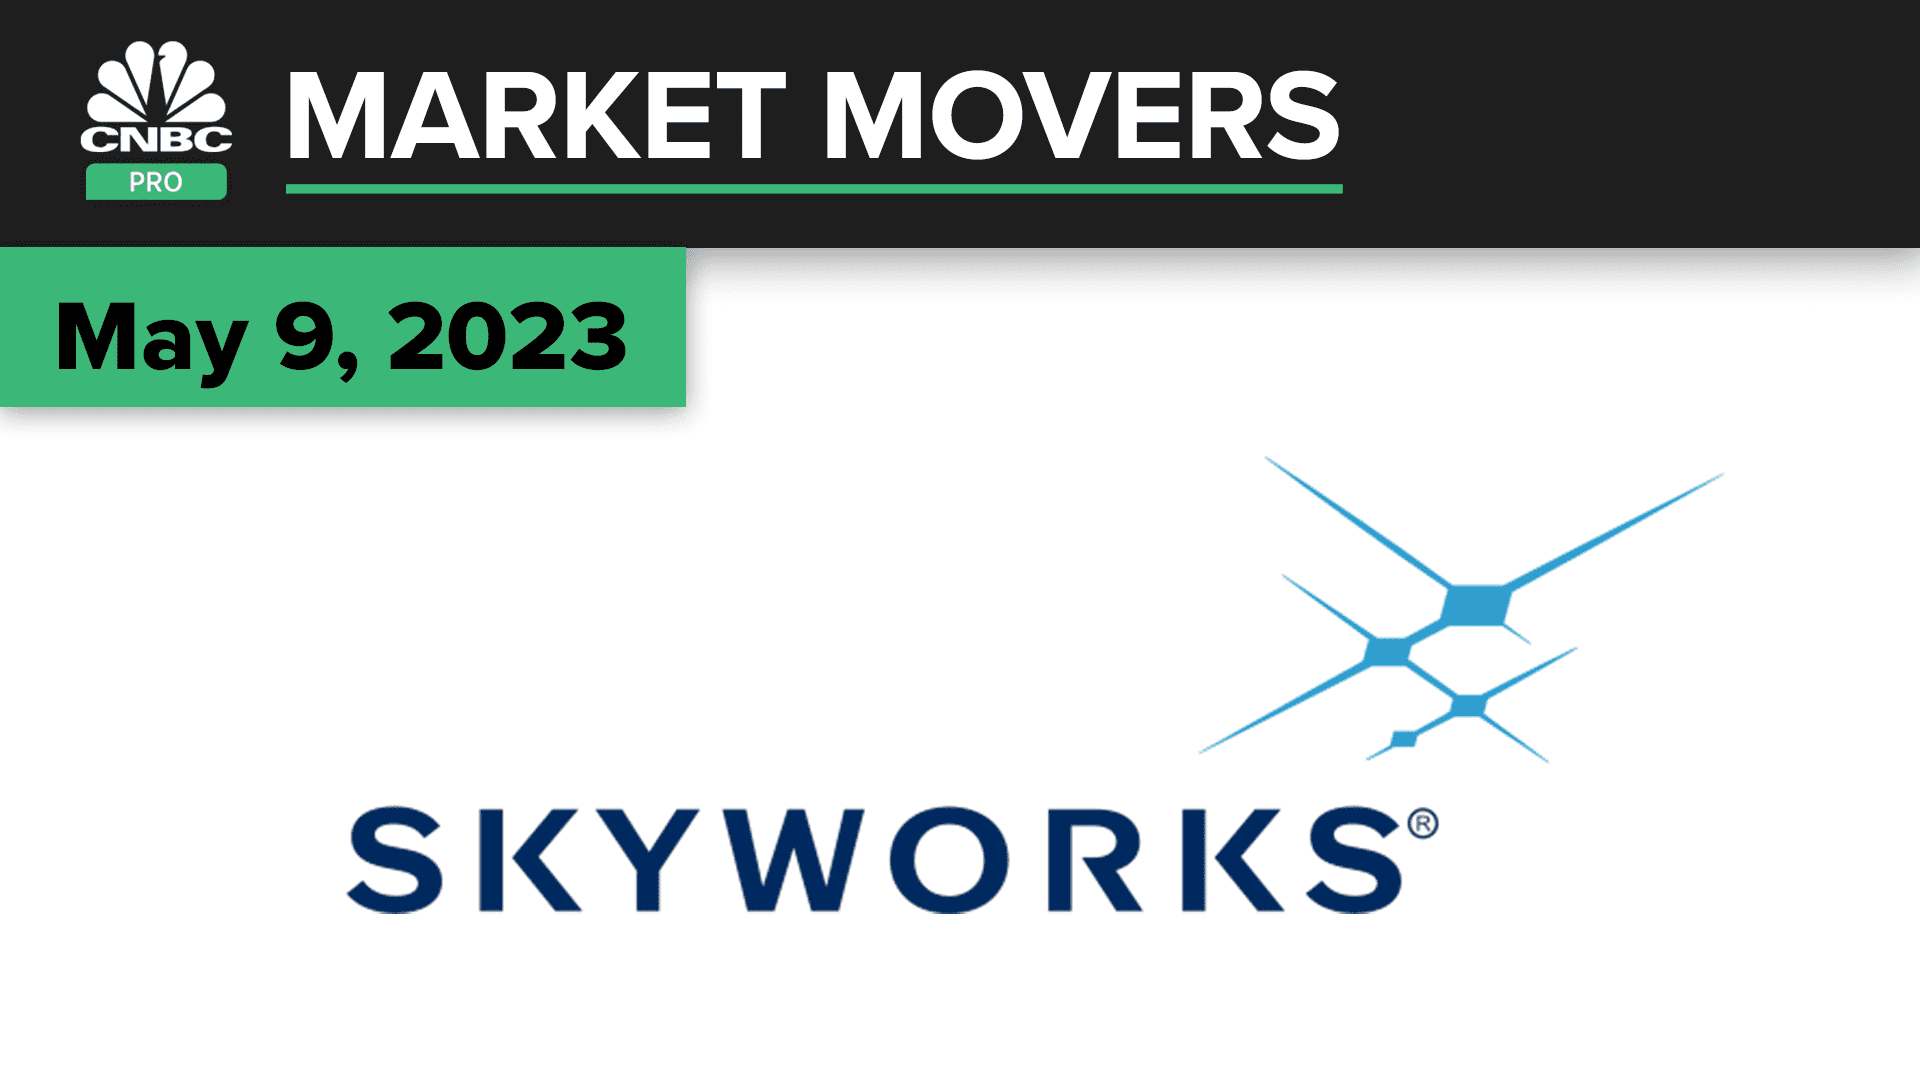 Skyworks Solutions falls after disappointing forecast. Here's what experts say to do next